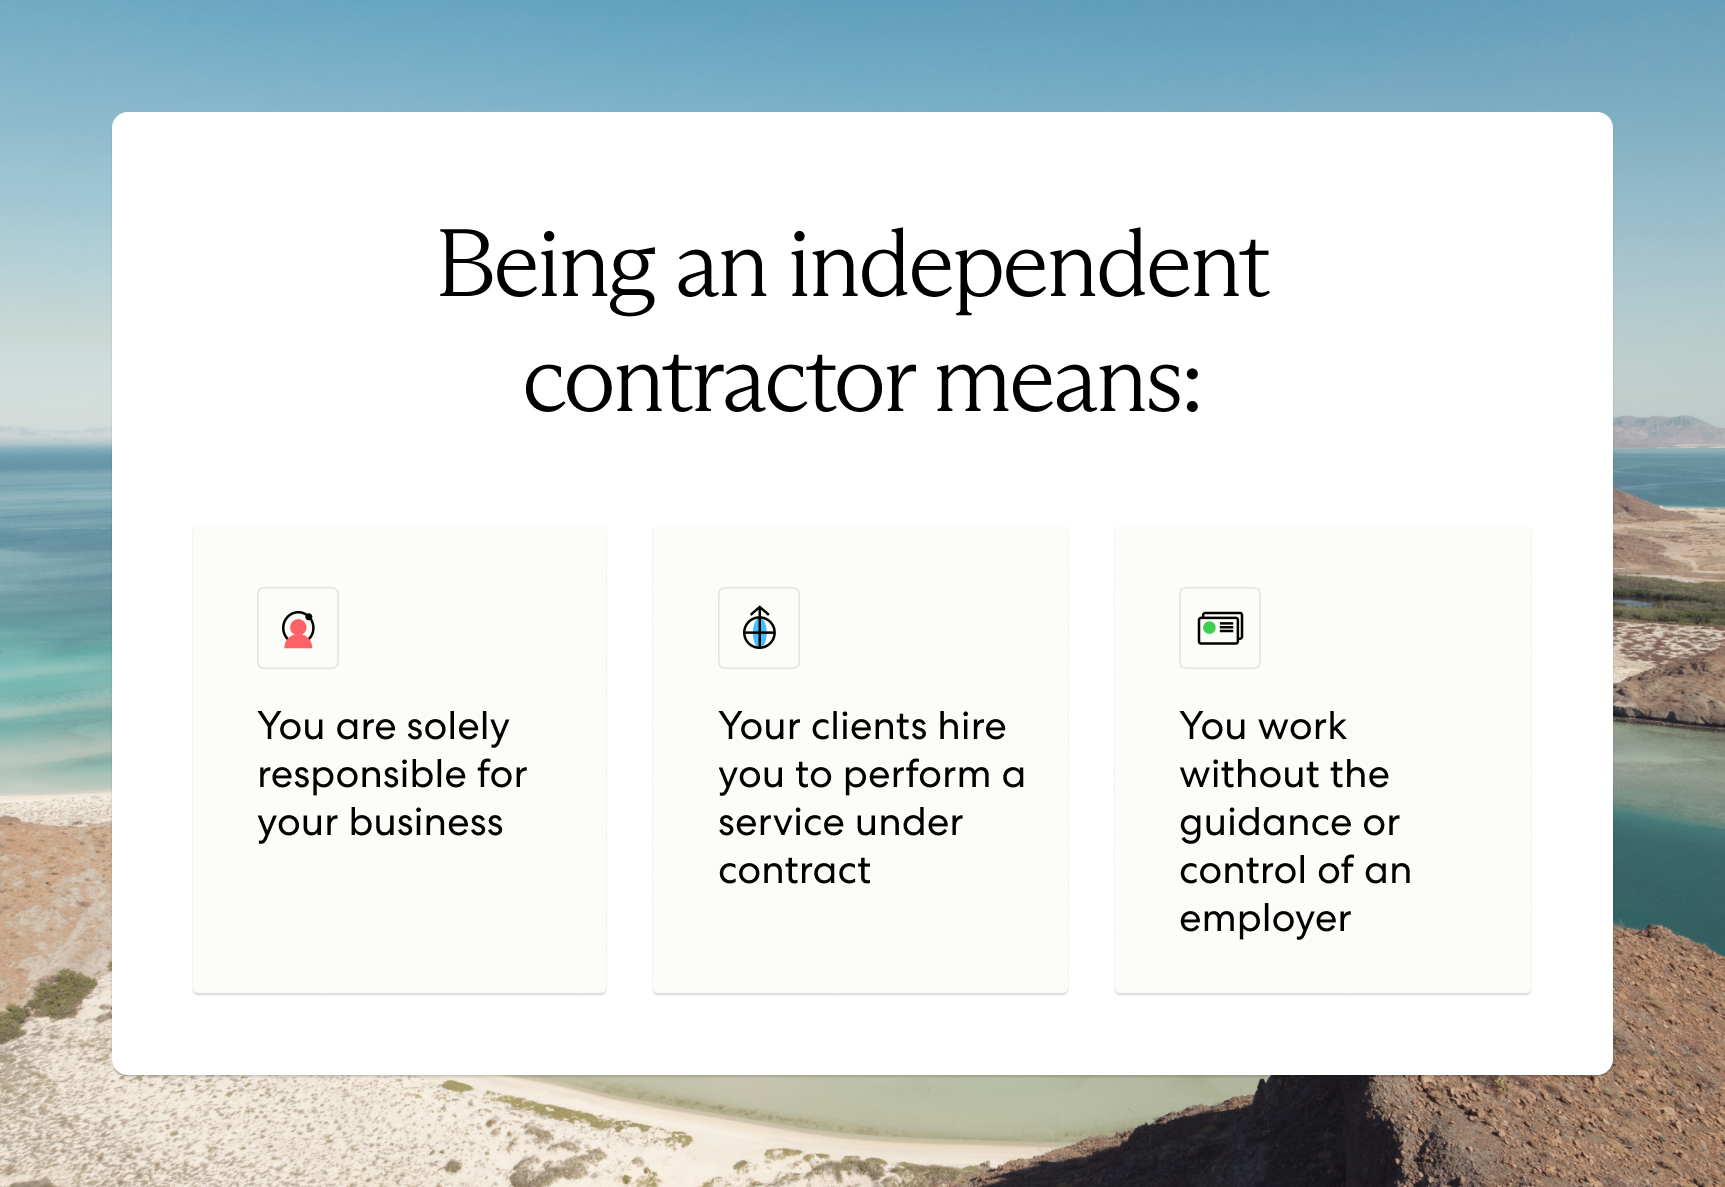 Being an independent contractor means